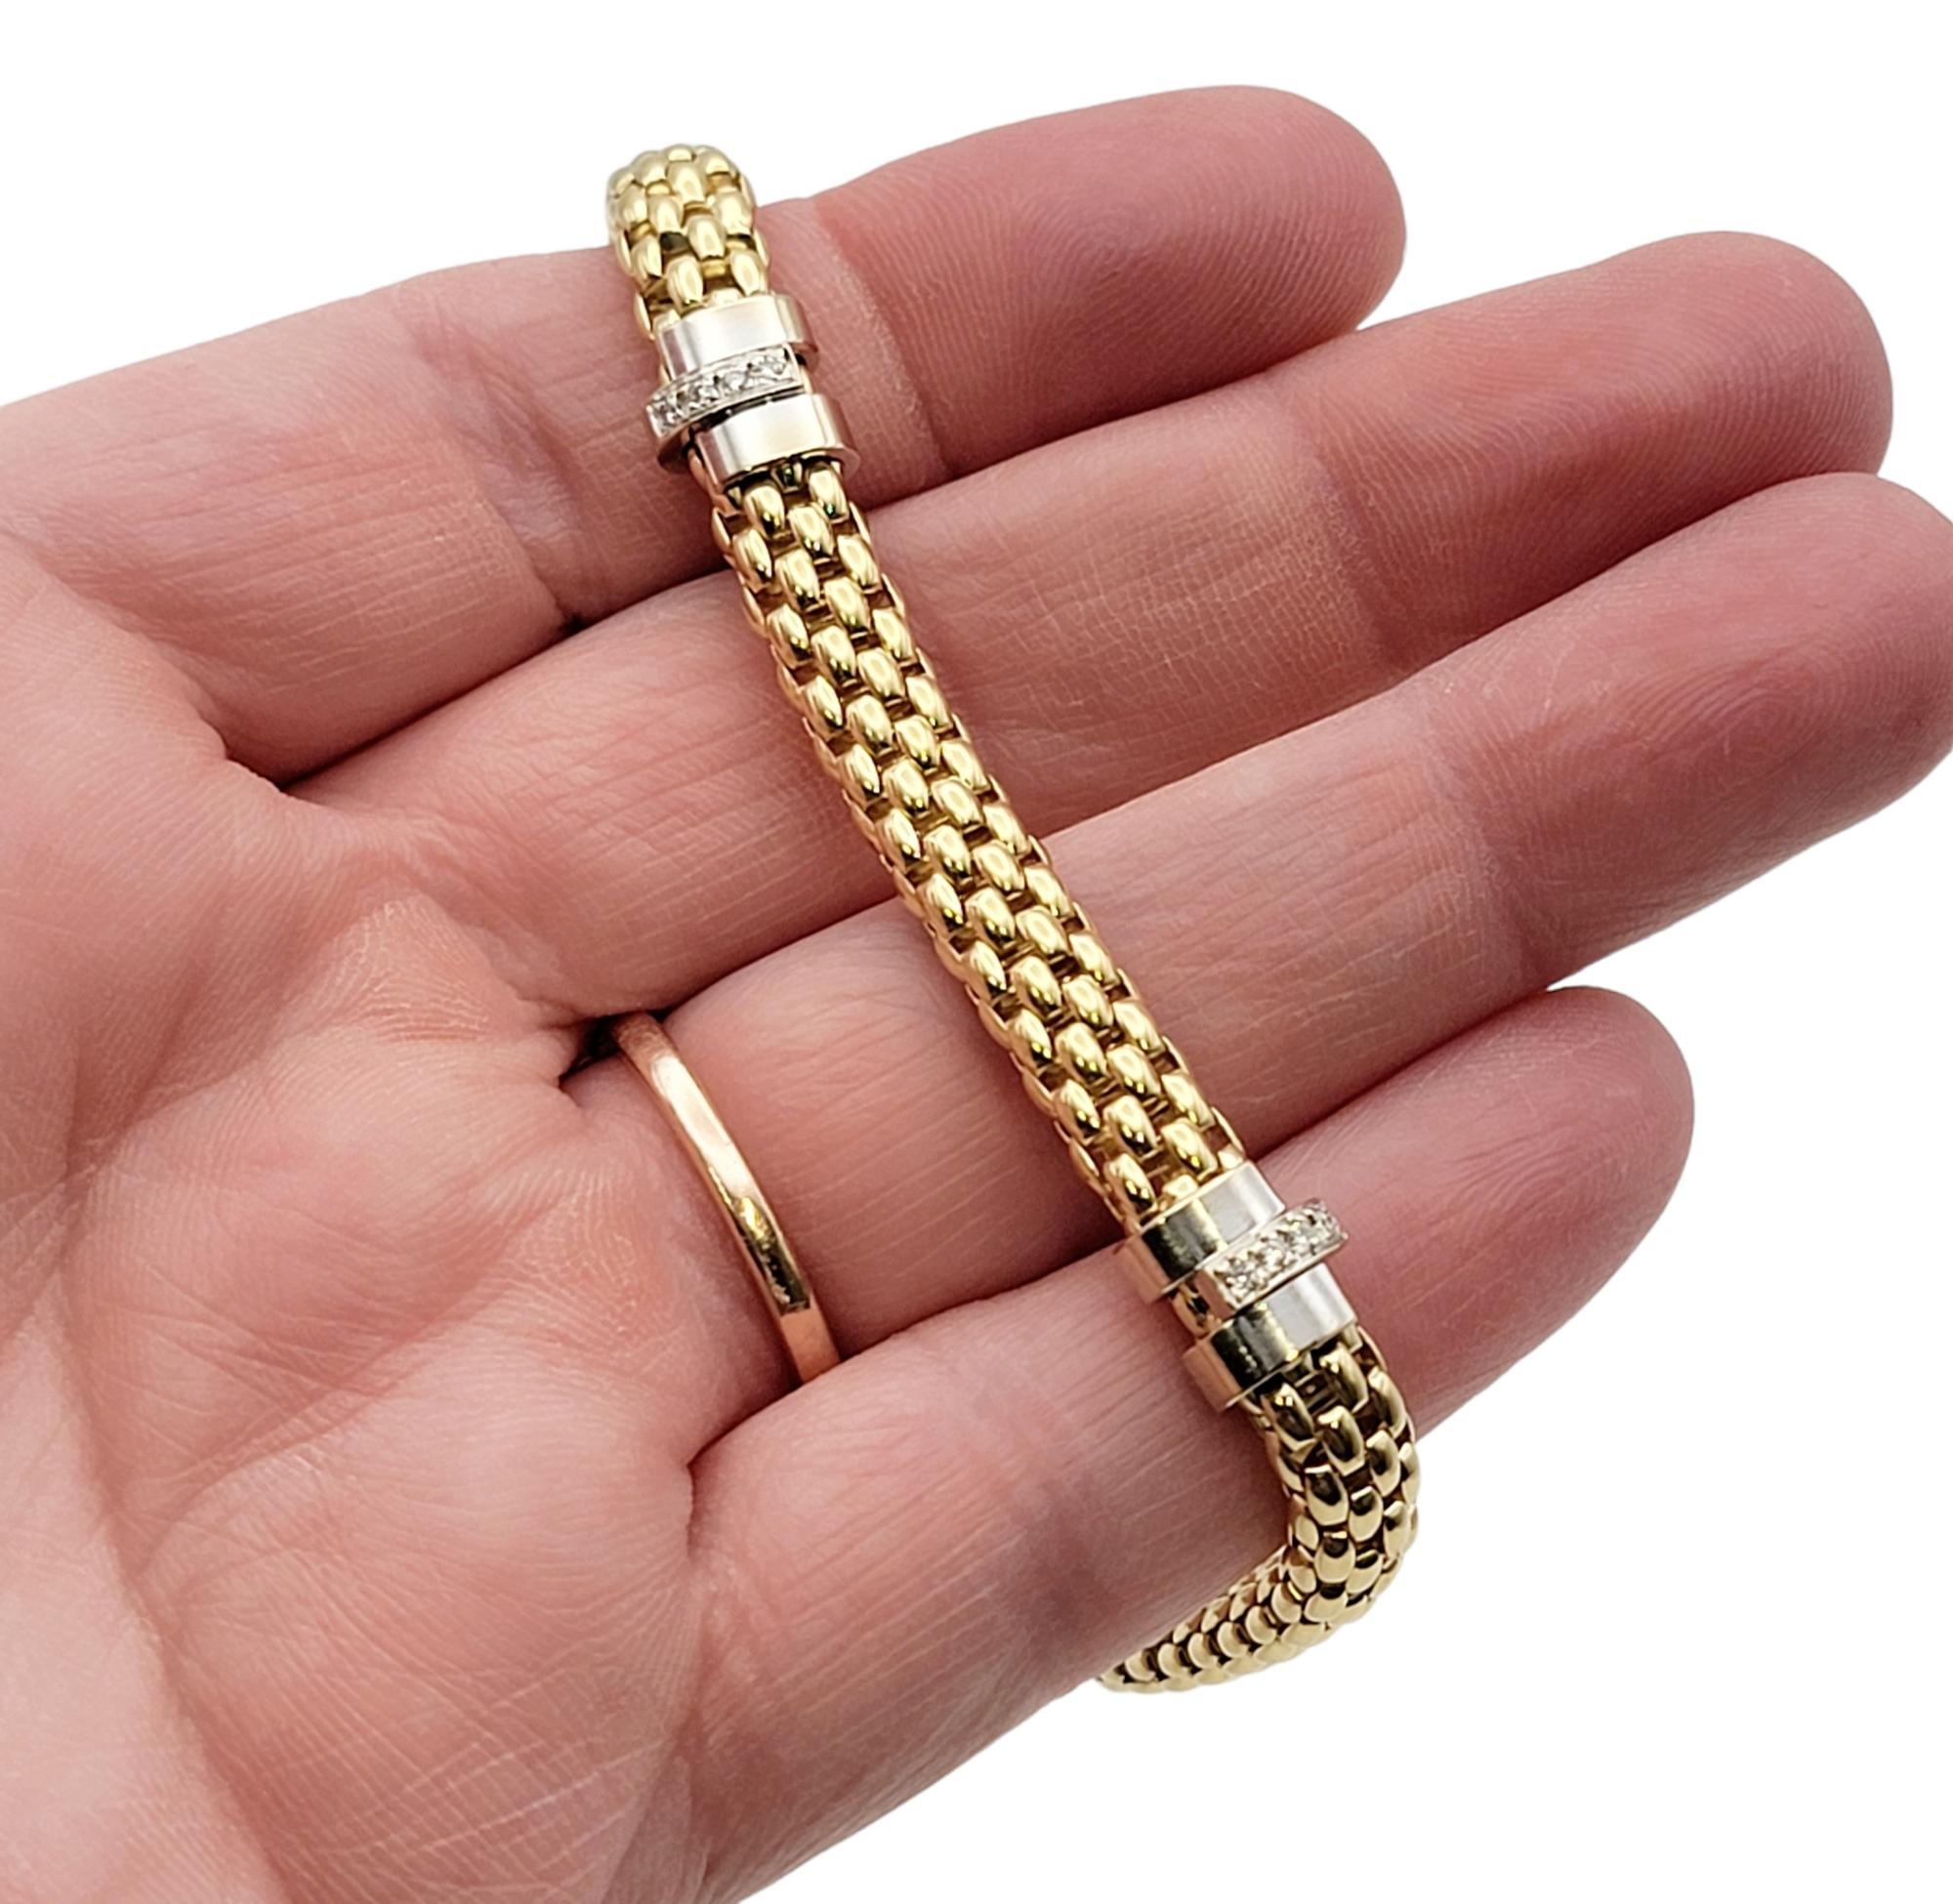 FOPE Two Tone 18 Karat Gold Mesh Link Bracelet with Pave Diamond Accents 3